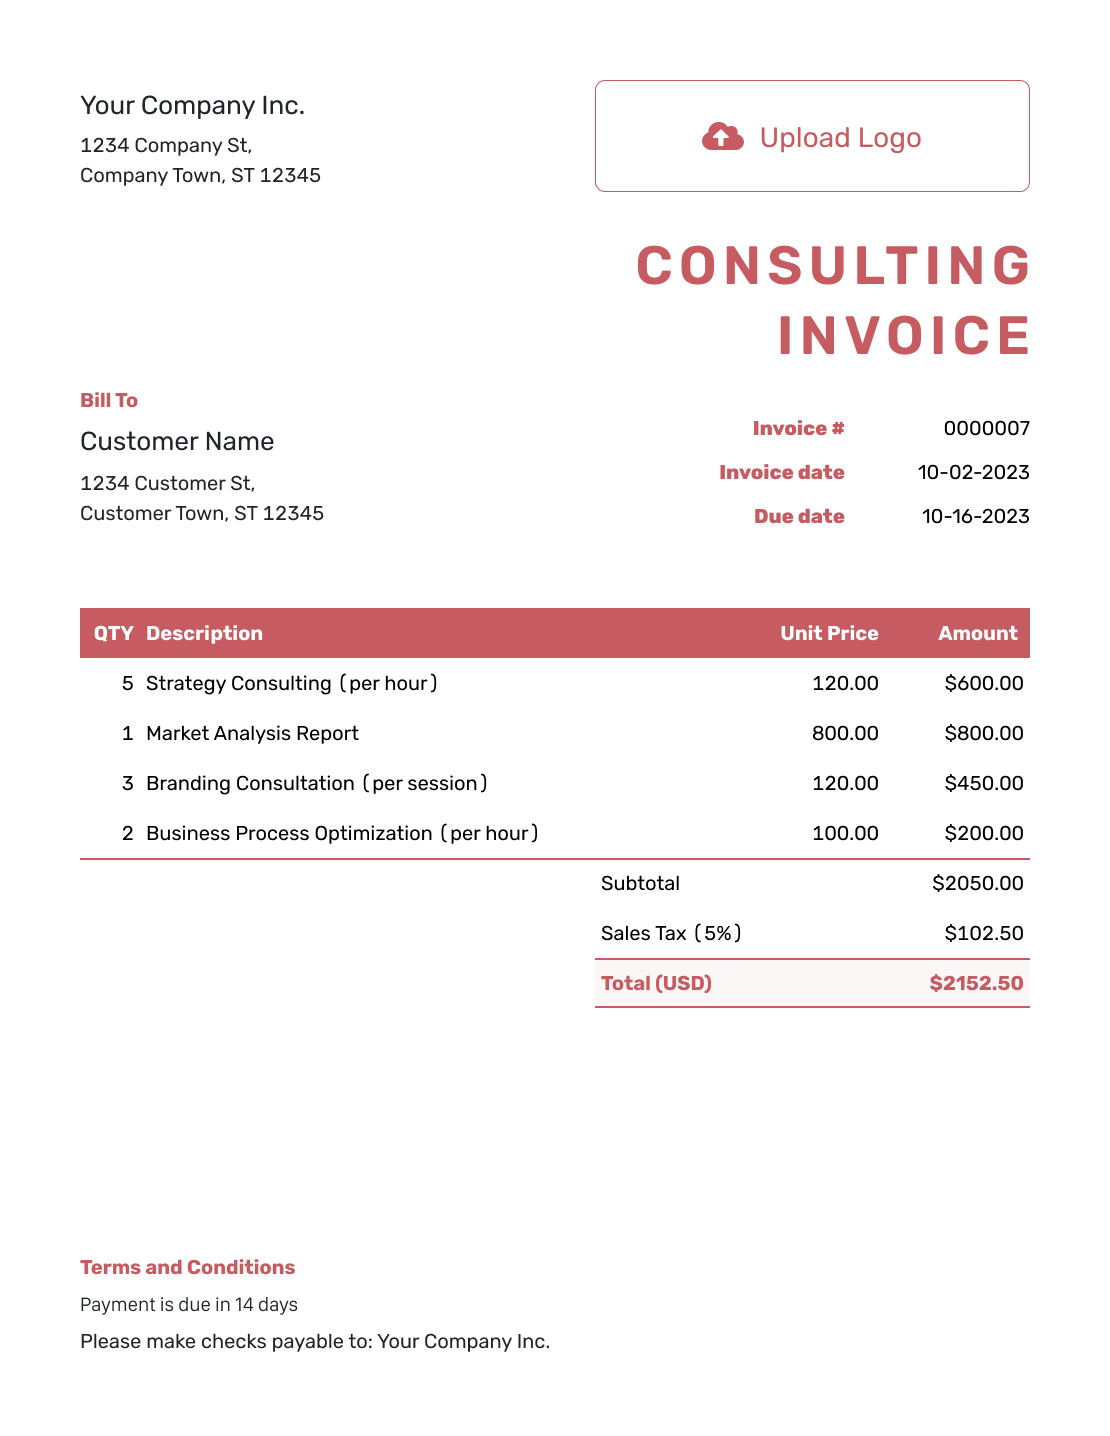 Itemized Consulting Invoice Template